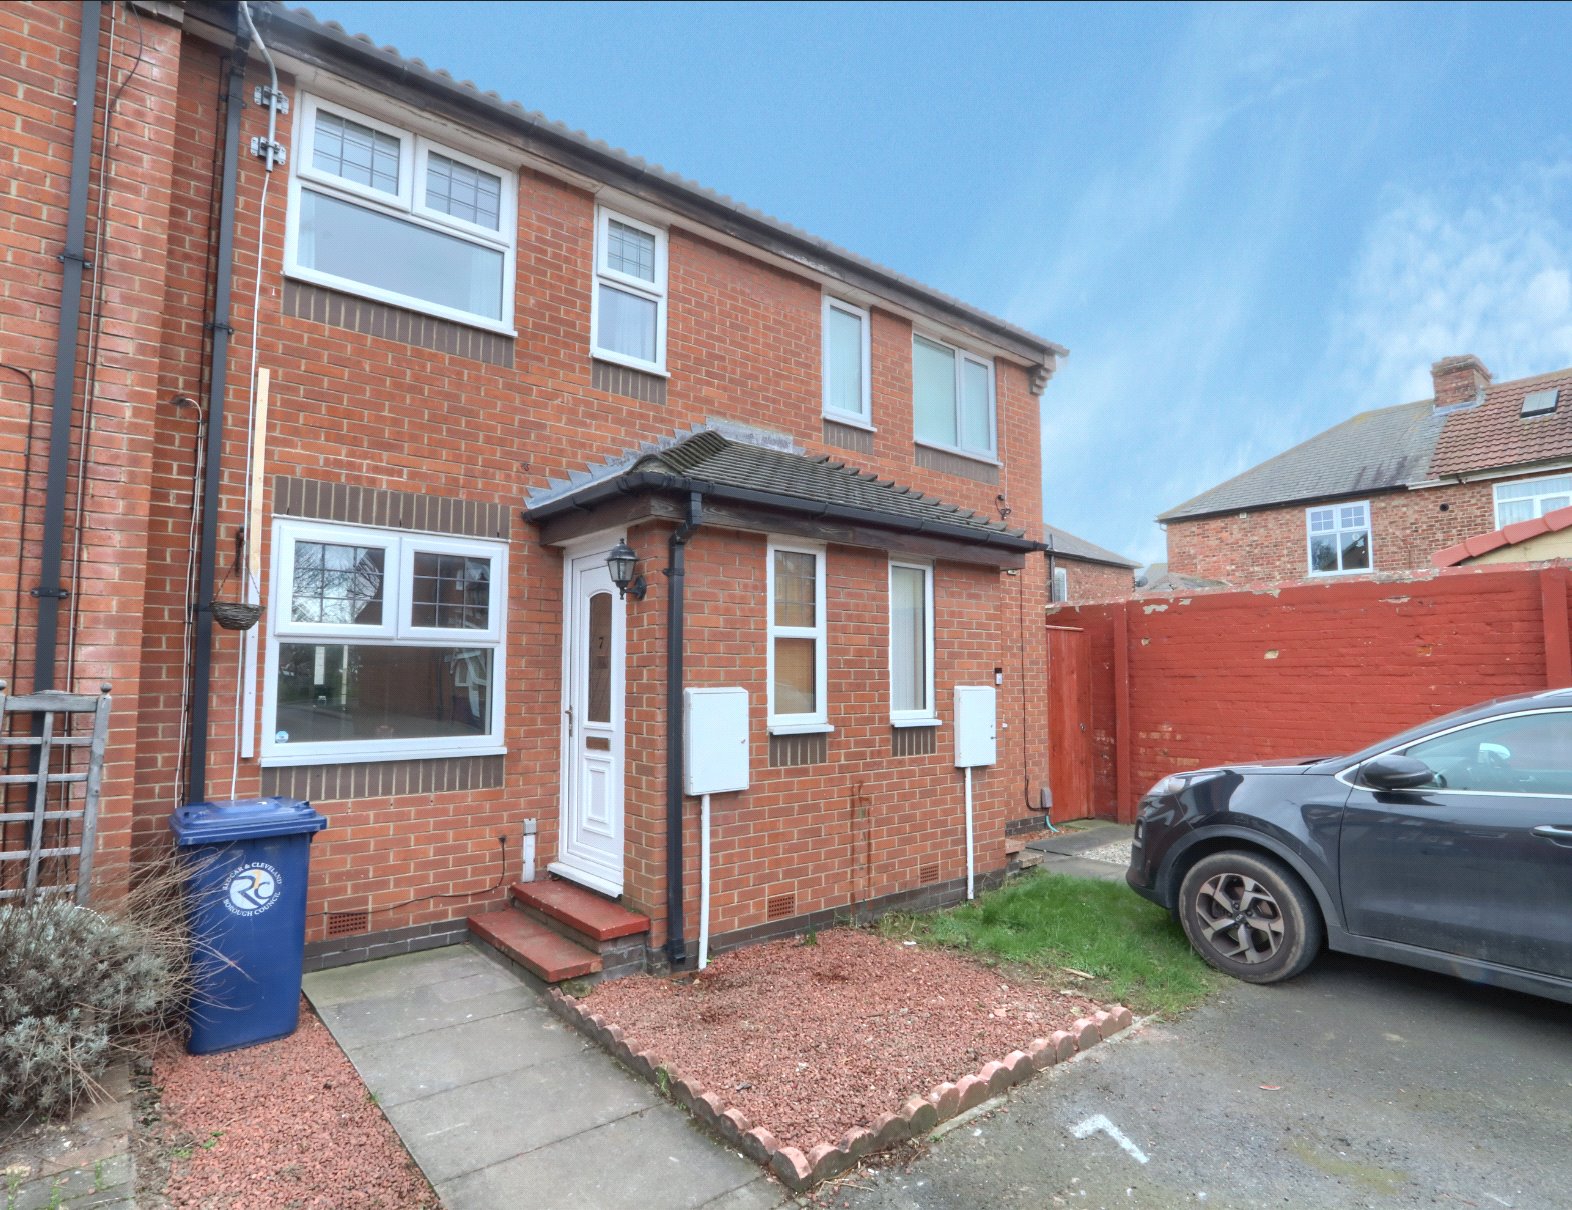 2 bed house for sale in Redcar Lane, Redcar - Property Image 1